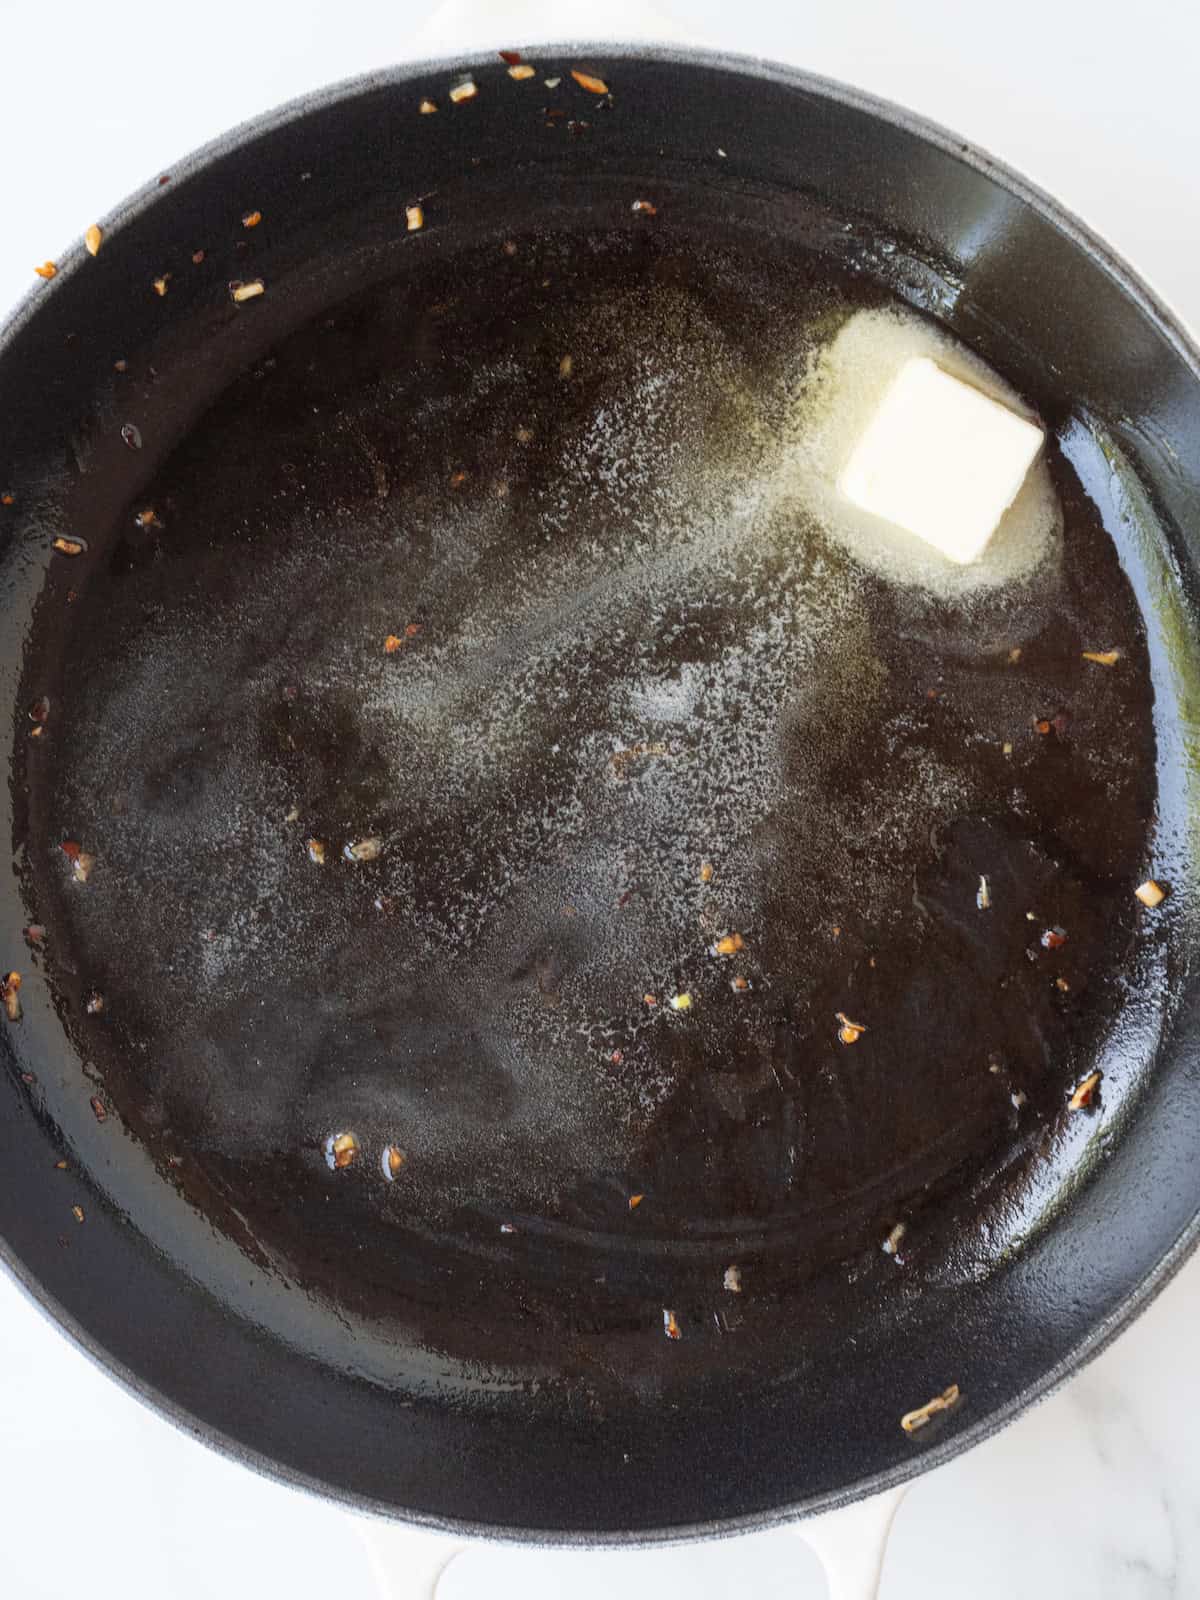 A skillet with oilive oil in it.